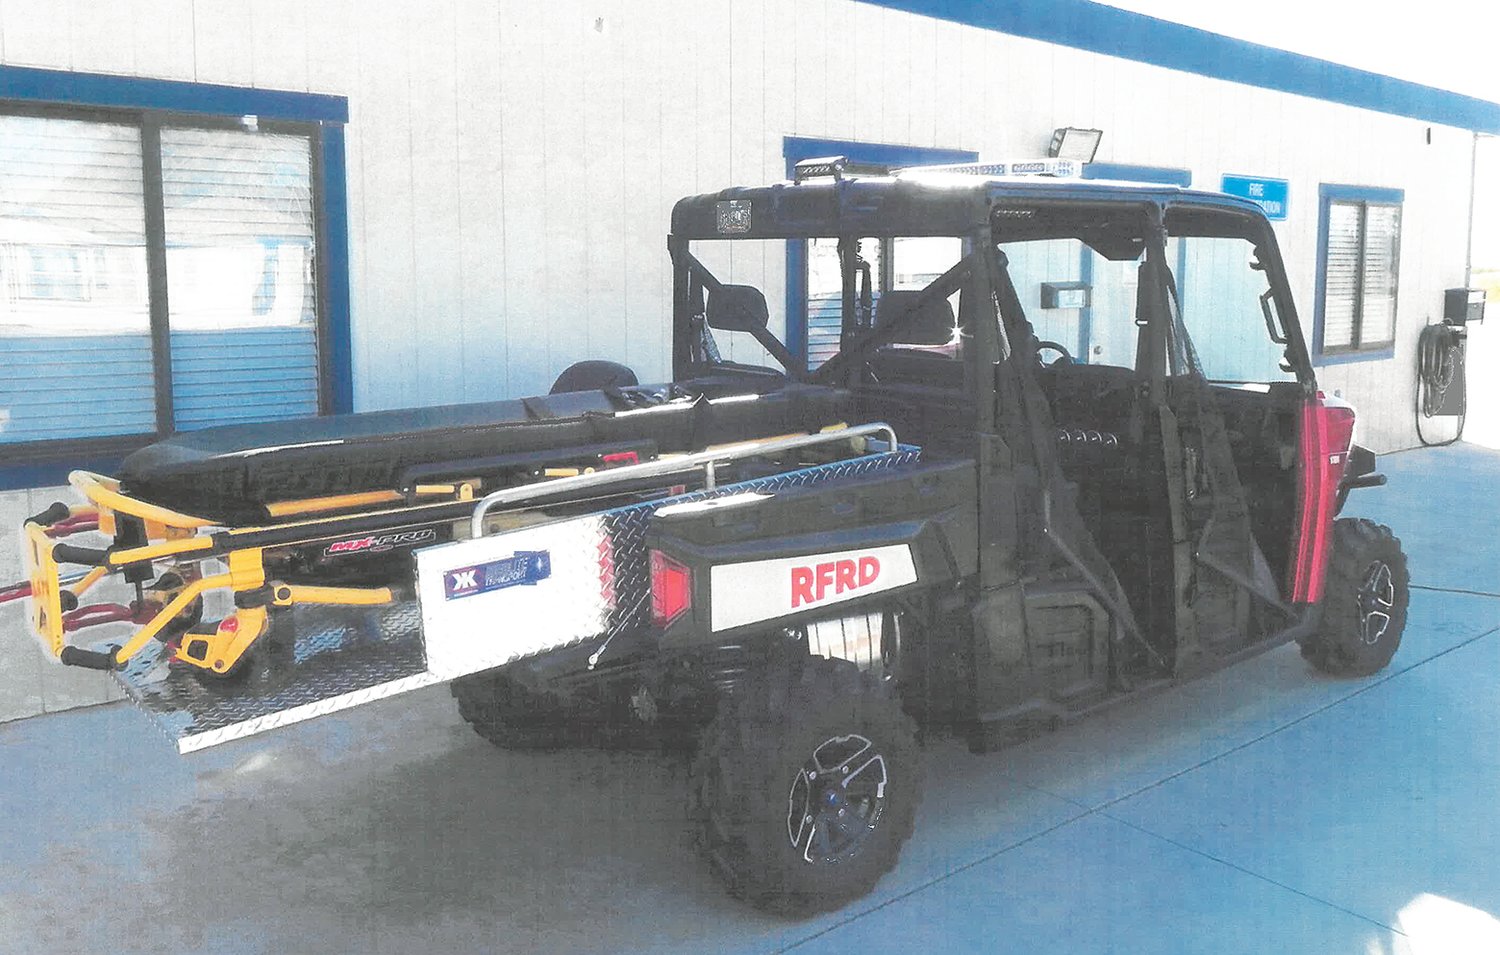 A 2017 Polaris Ranger and Ziema ATV trailer was found and purchased by the West Liberty Fire Department and Ambulance Service for $30,000 online. The department will be using this piece of equipment for rescues in locations an ambulance can't get to.